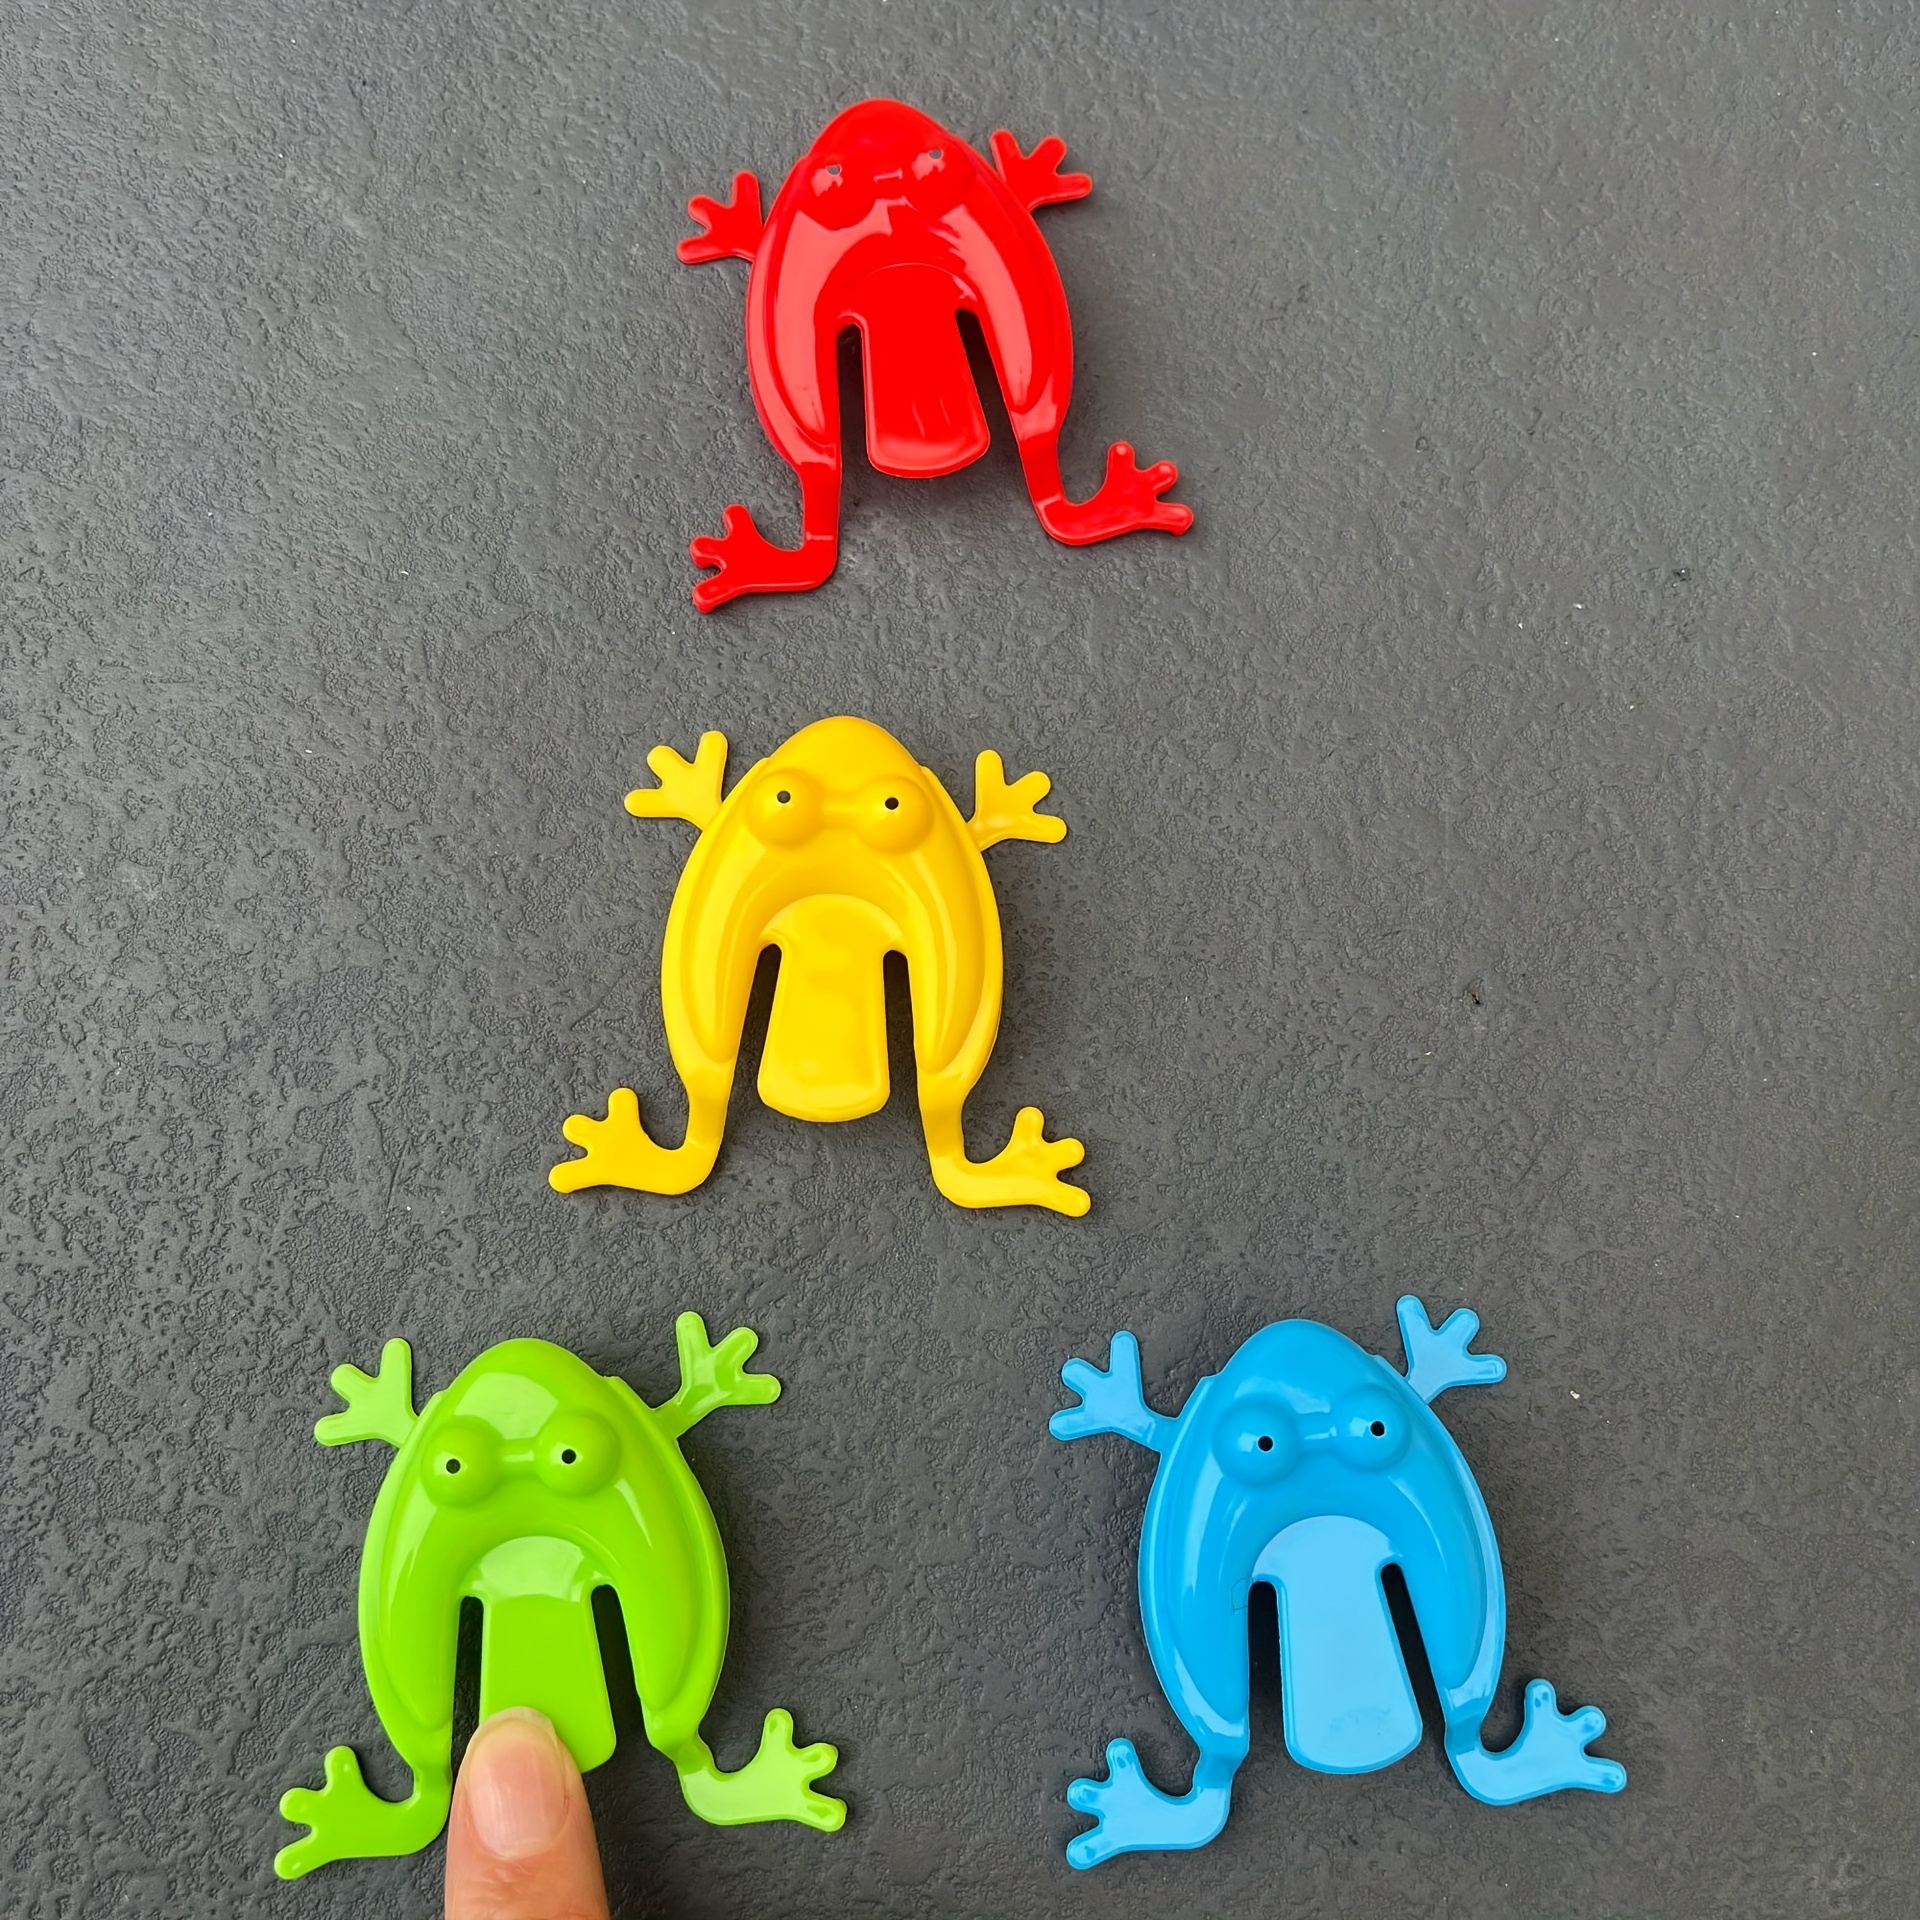 Jumping Frog Toy Assorted Color Jumping Frog Toys Plastic Jumping